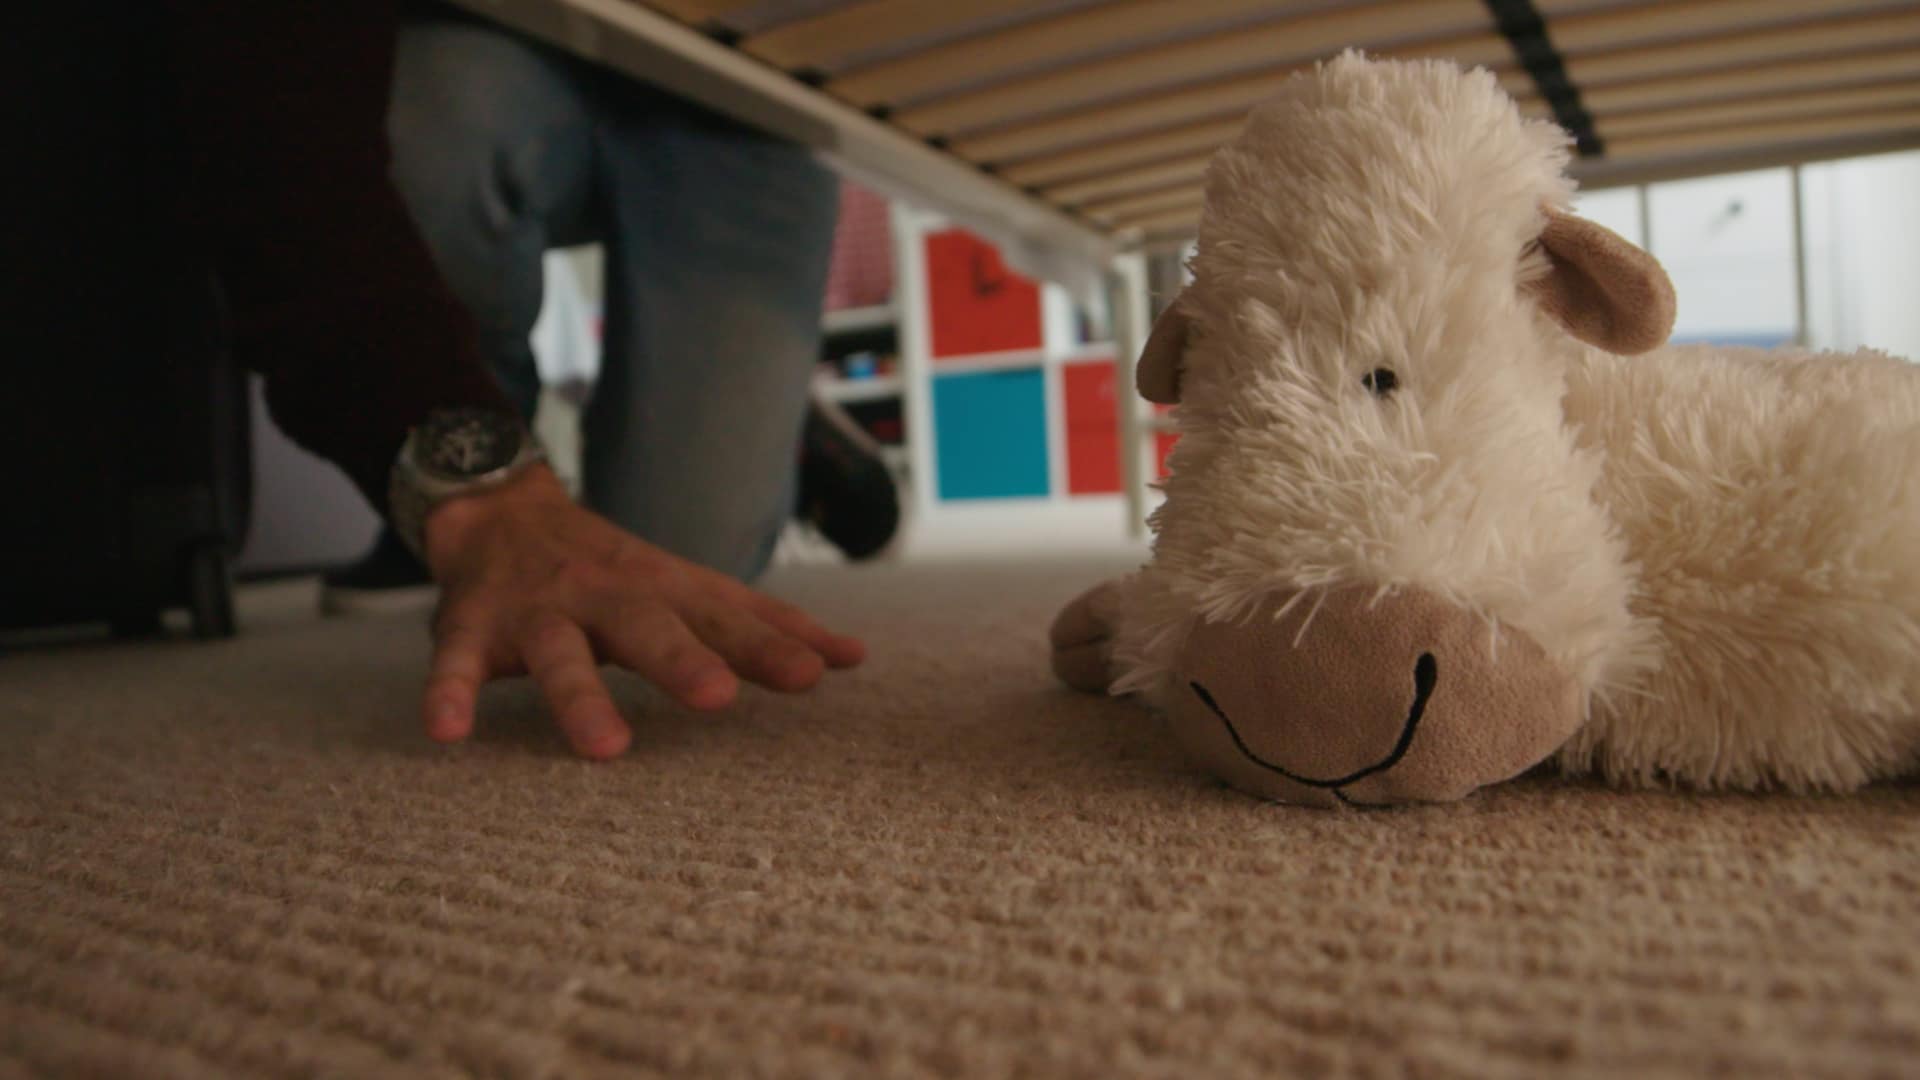 stuffed animal being found under the bed at a vacation home